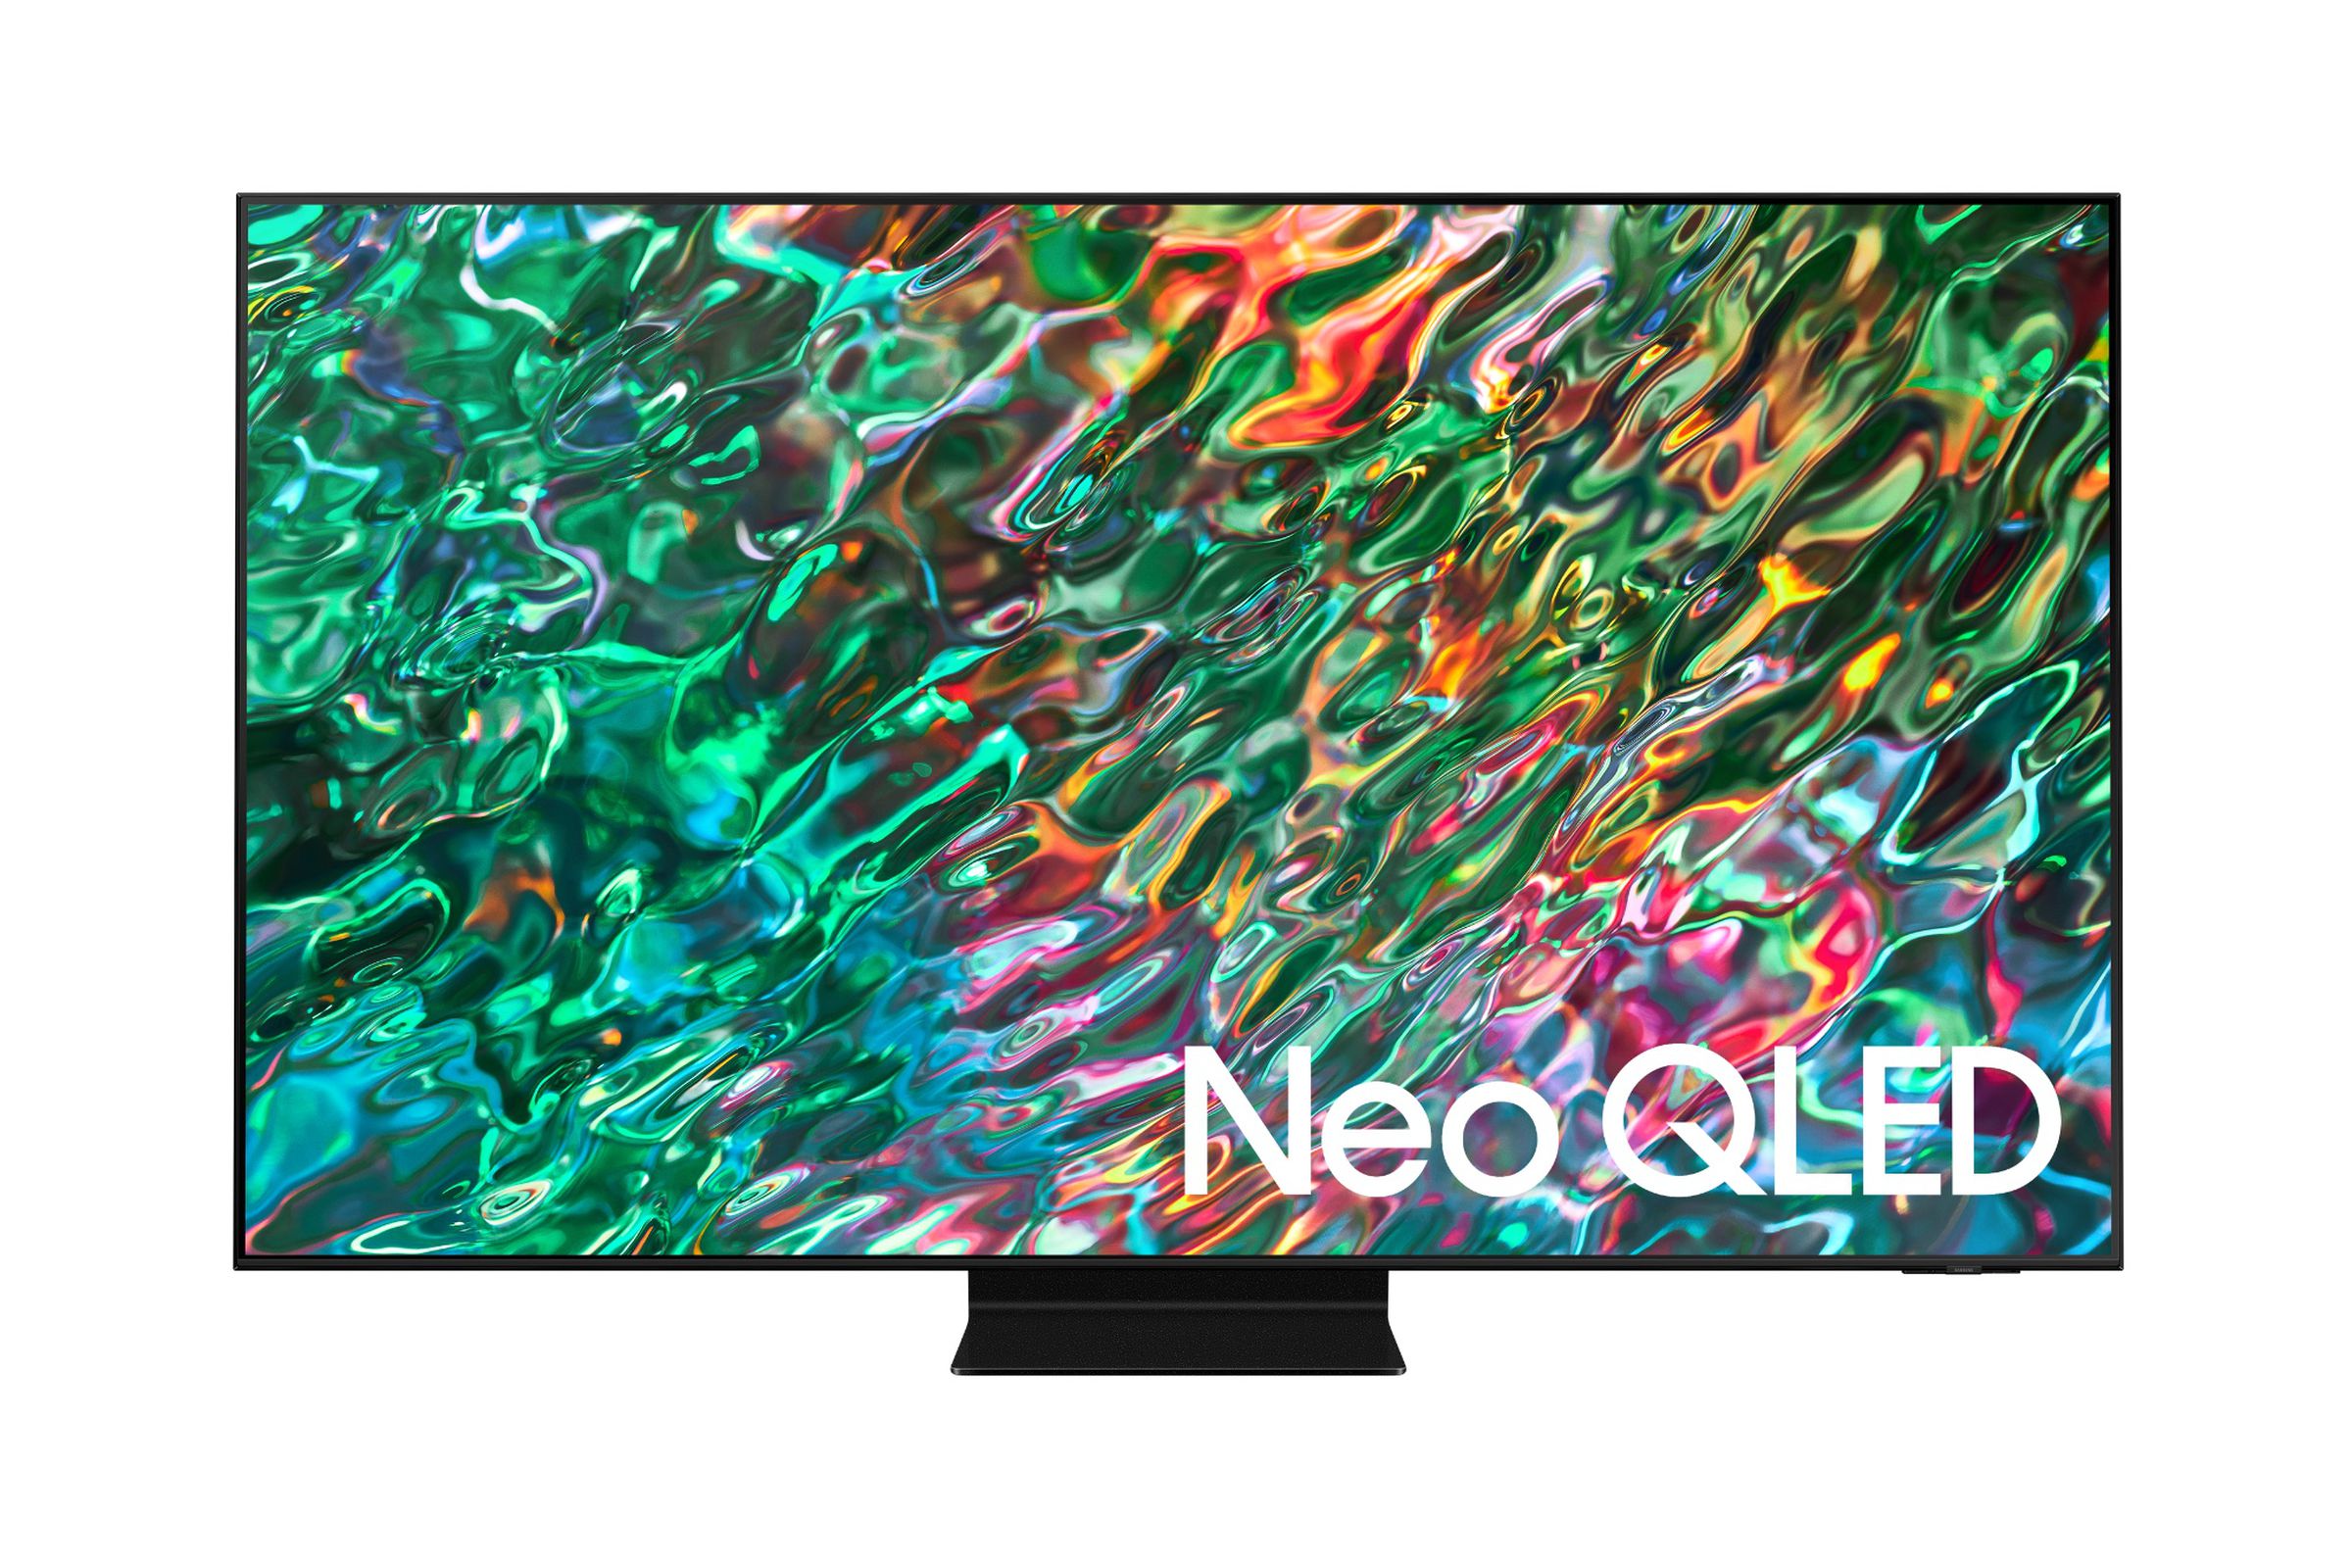 Samsung says its 2022 Neo QLED TVs will feature improved depth and expanded 14-bit HDR Mapping. 